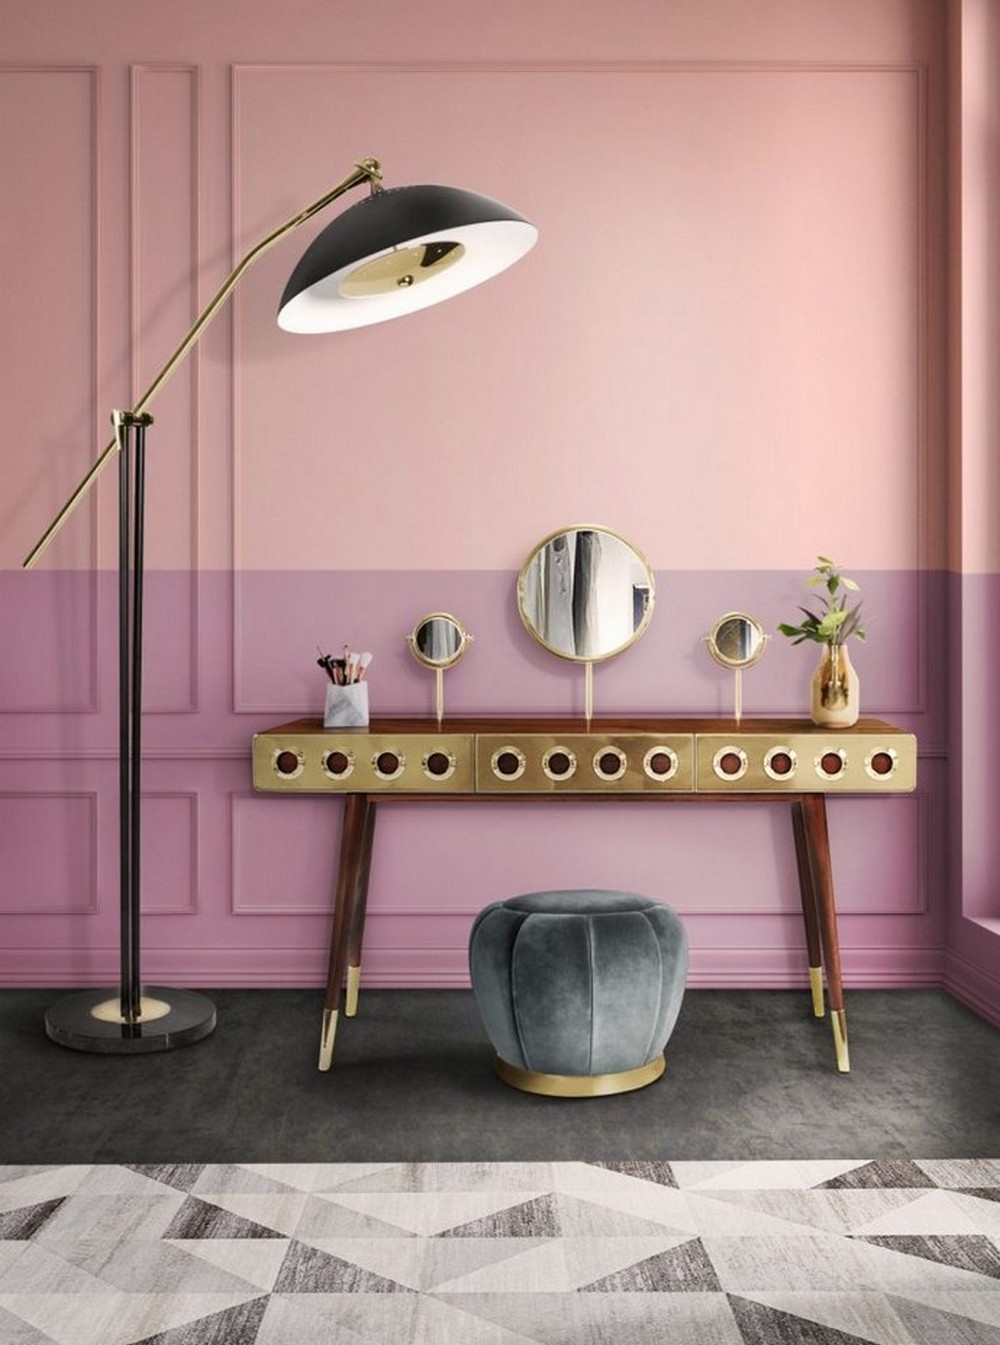 Benjamin Moore Just Announced The Color Of The Year For 2020